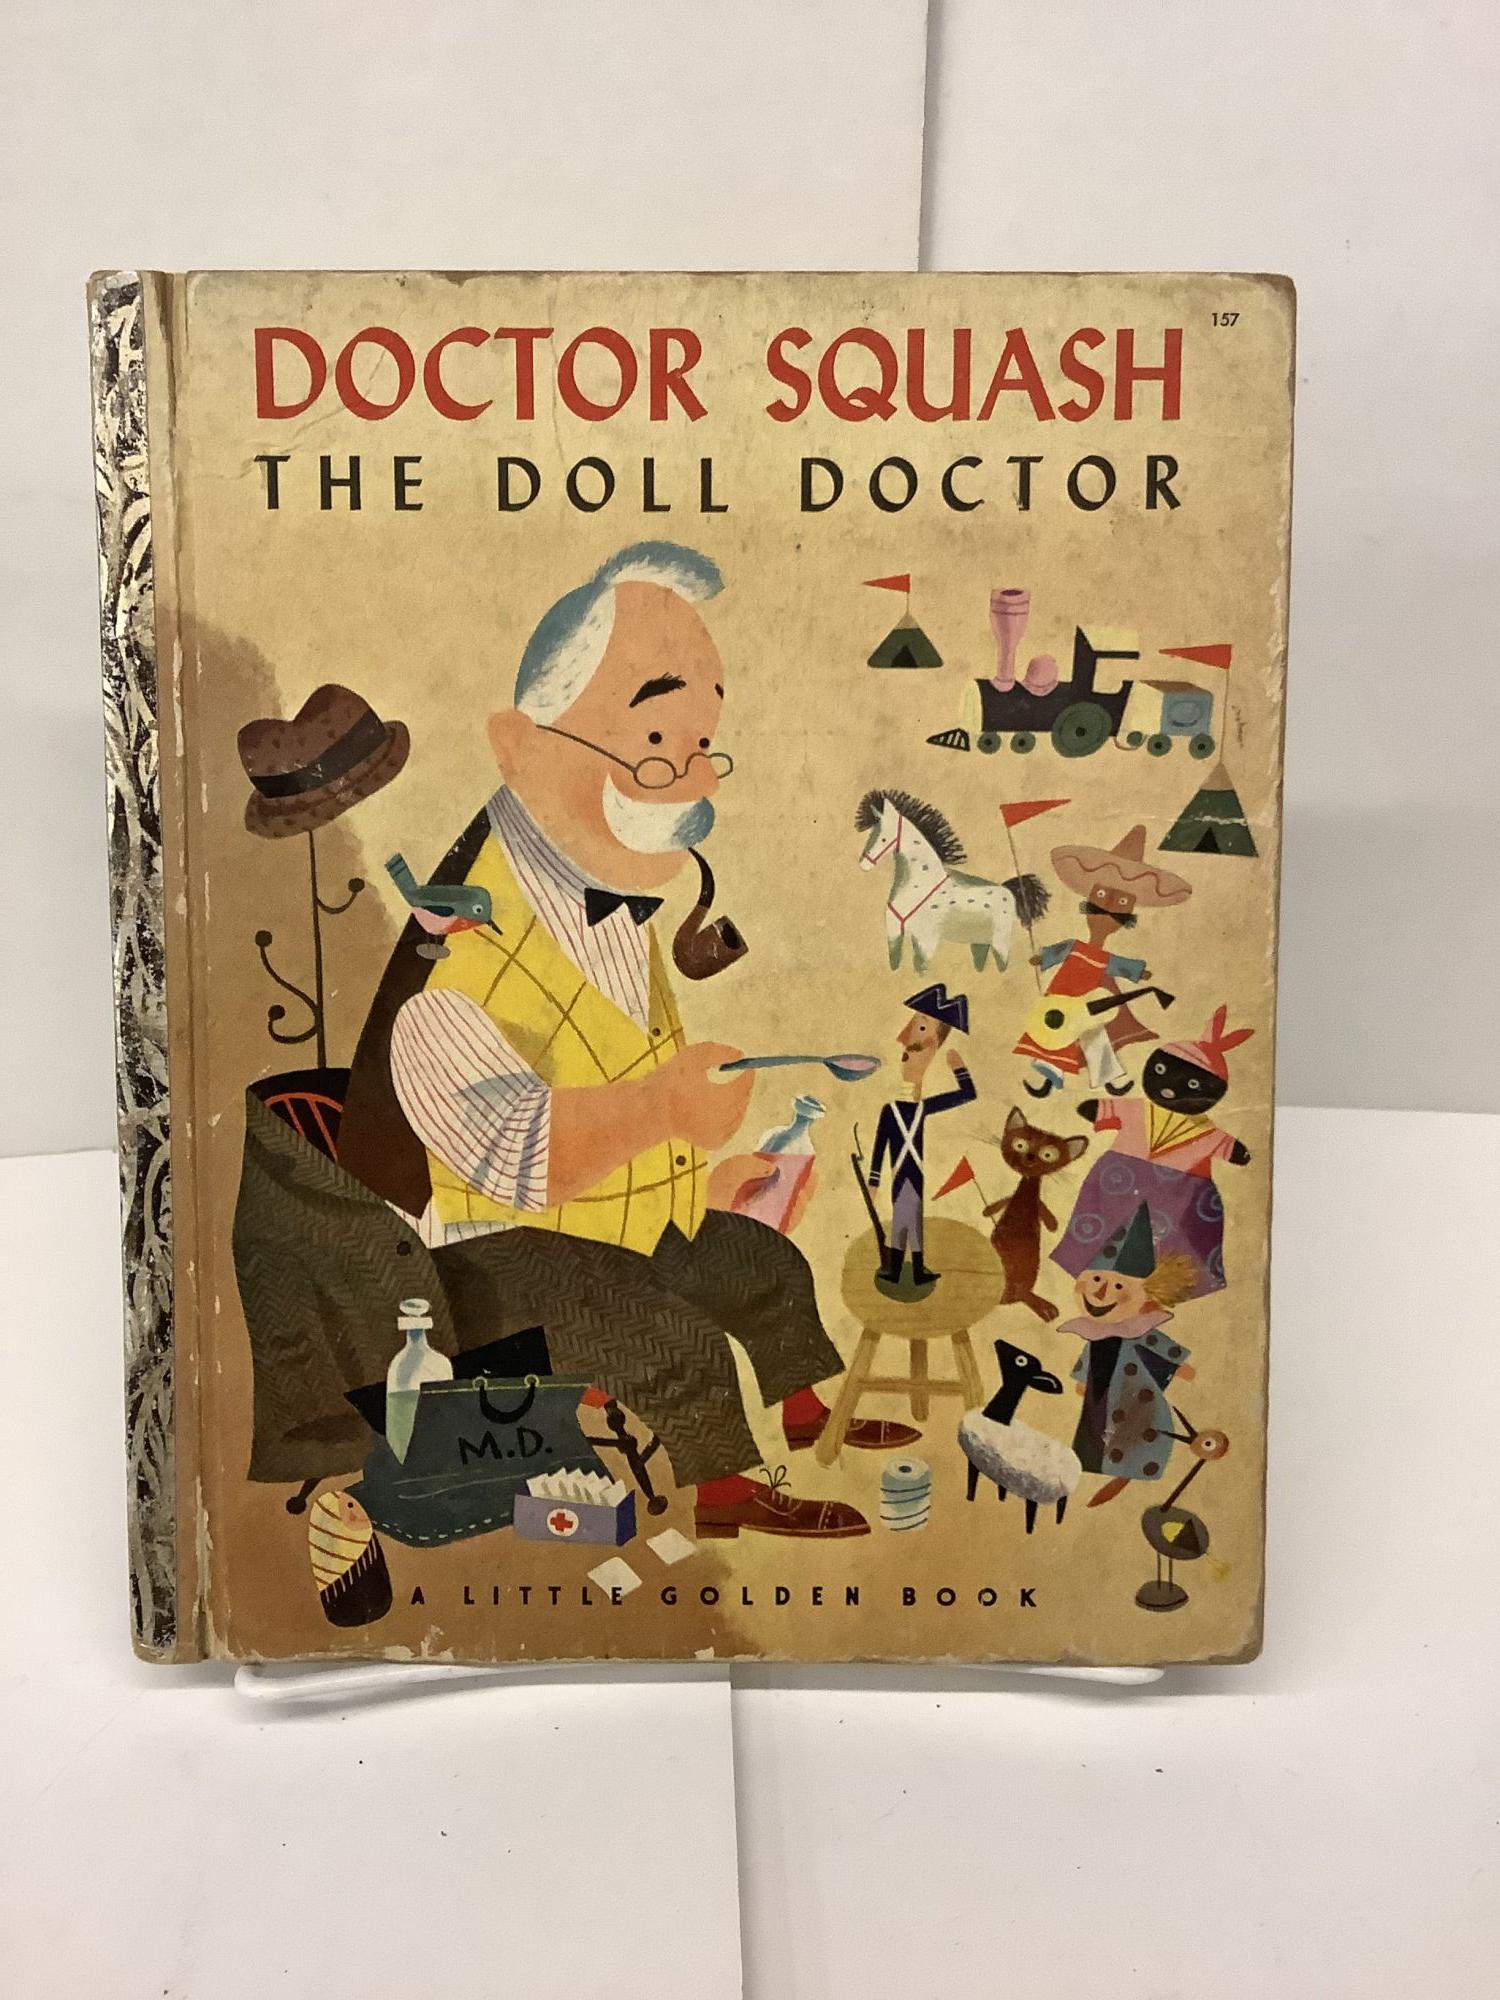 Doctor Squash, The Doll Doctor by Margaret Wise Brown on Chamblin Bookmine